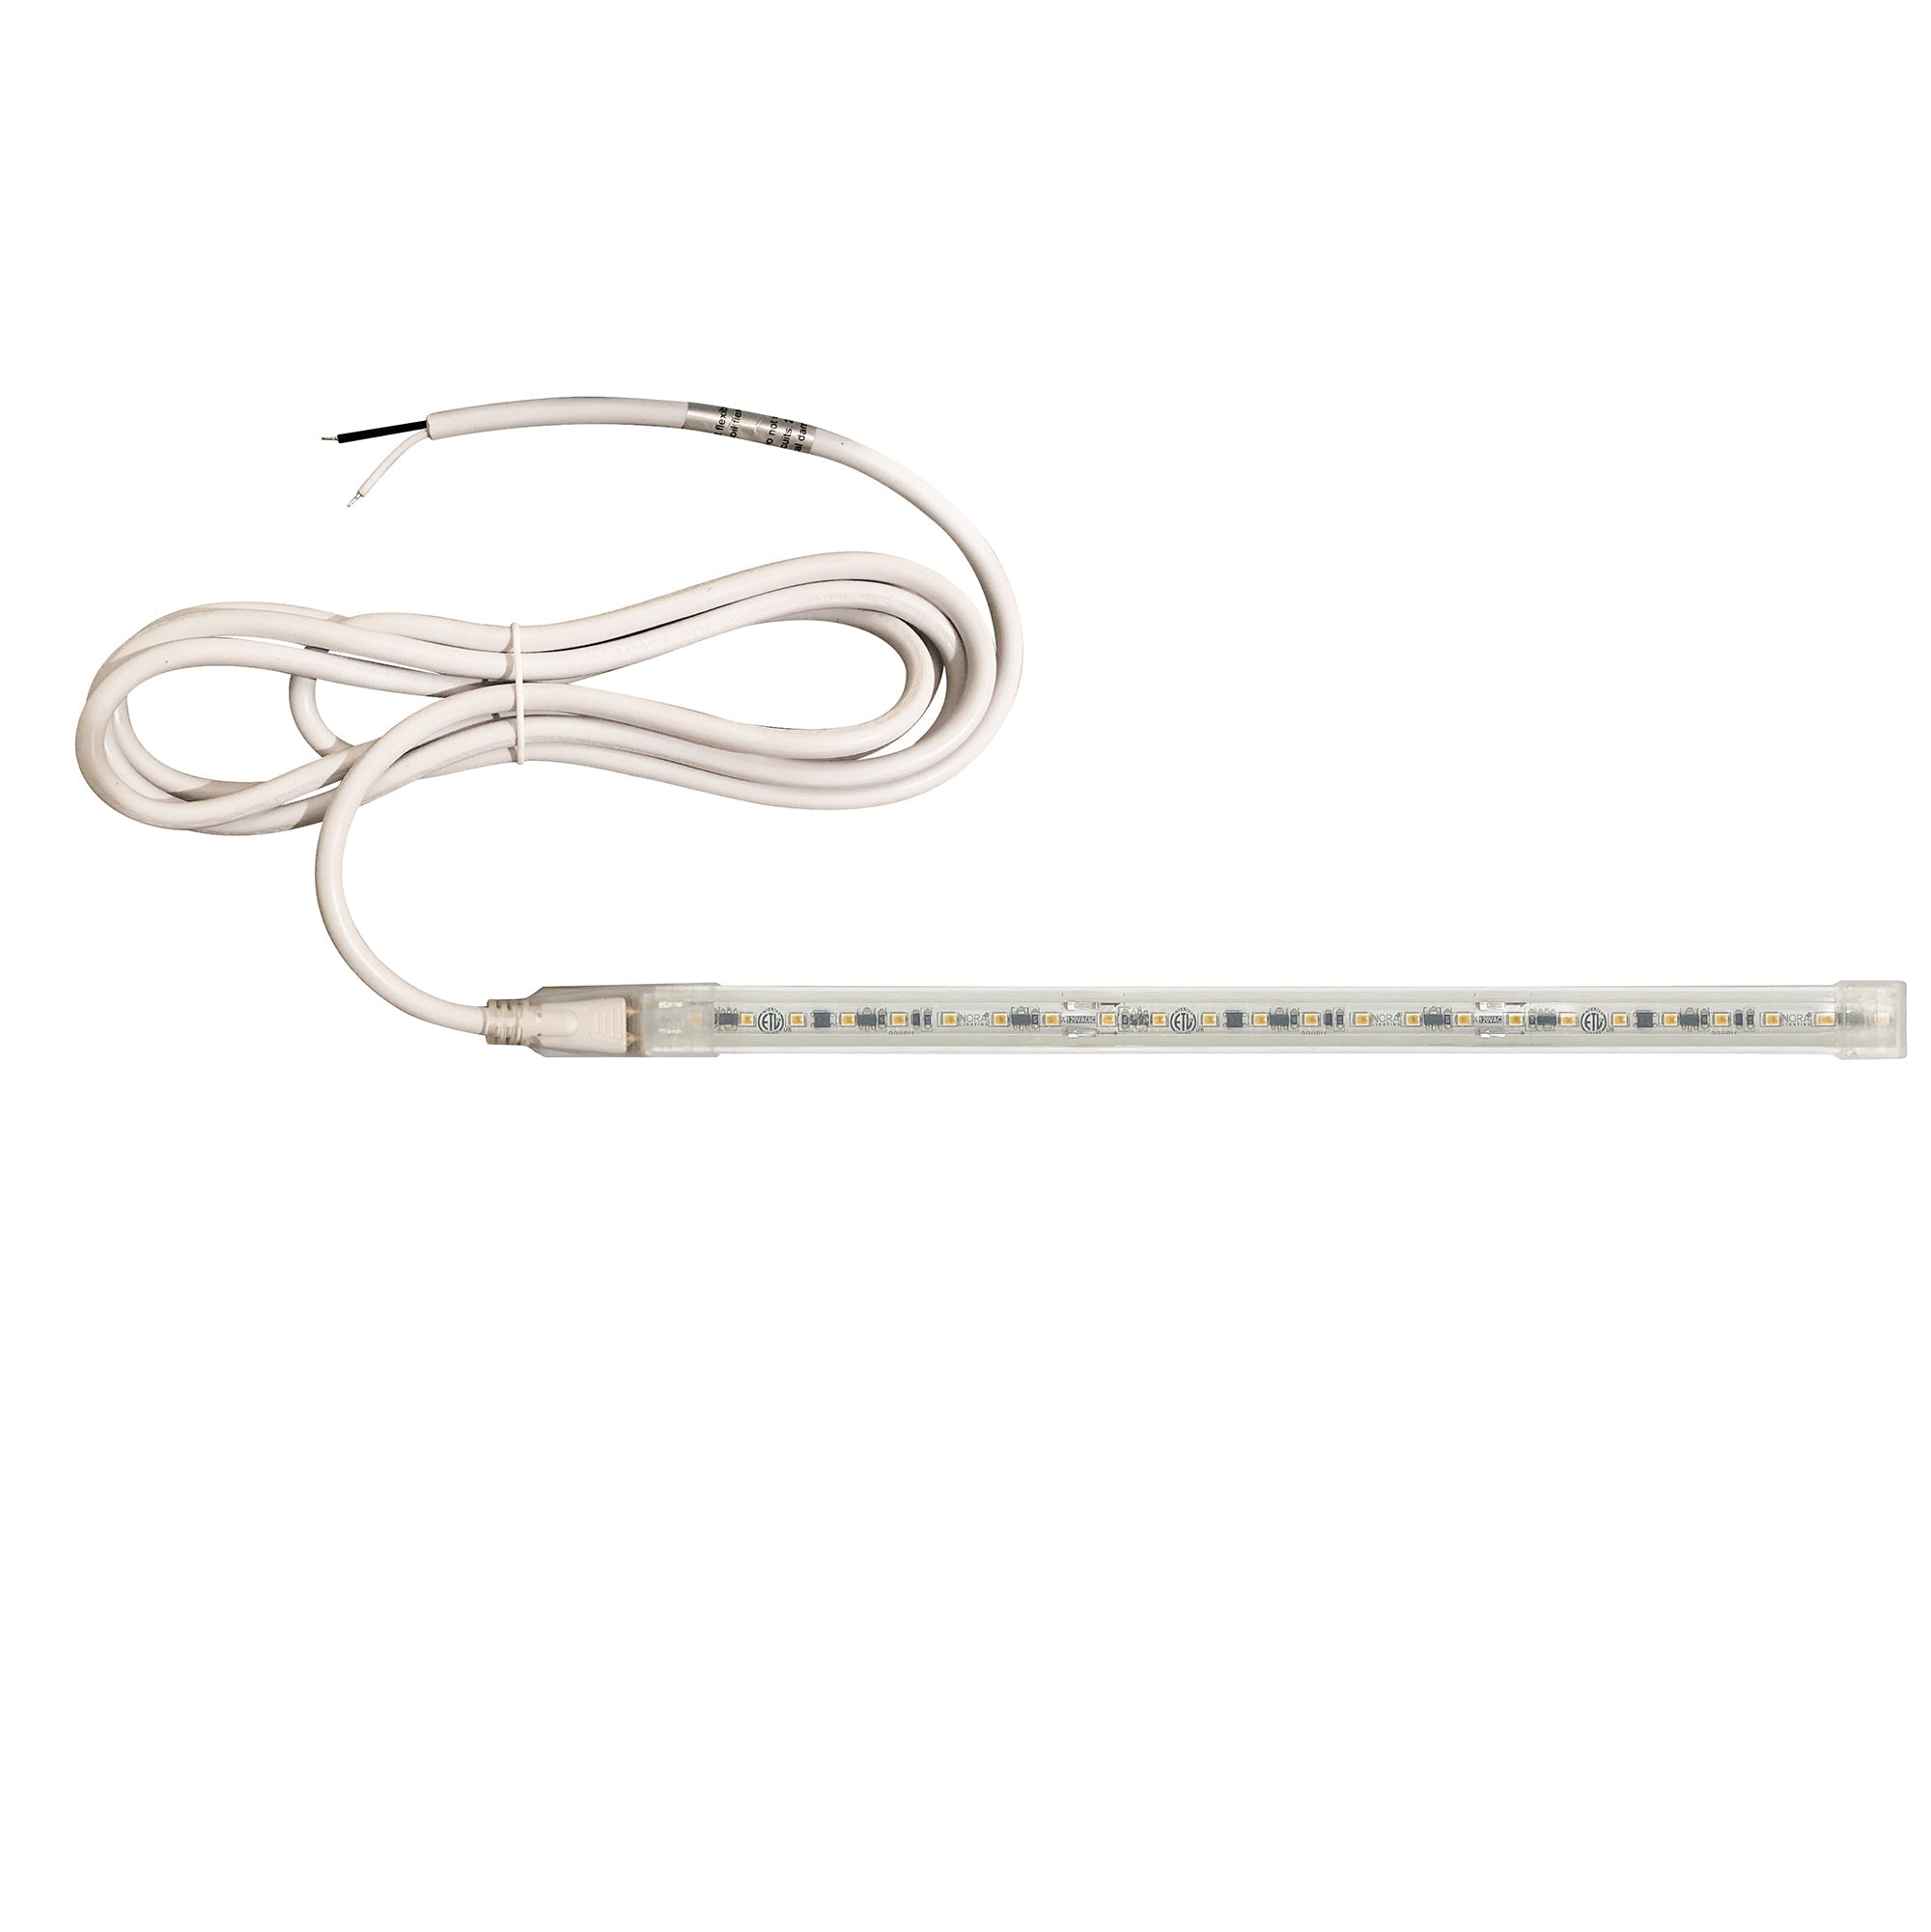 Nora Lighting NUTP13-W52-12-940/HW - Accent / Undercabinet - Custom Cut 52-ft 120V Continuous LED Tape Light, 330lm / 3.6W per foot, 4000K, w/ Mounting Clips and 8' Hardwired Power Cord